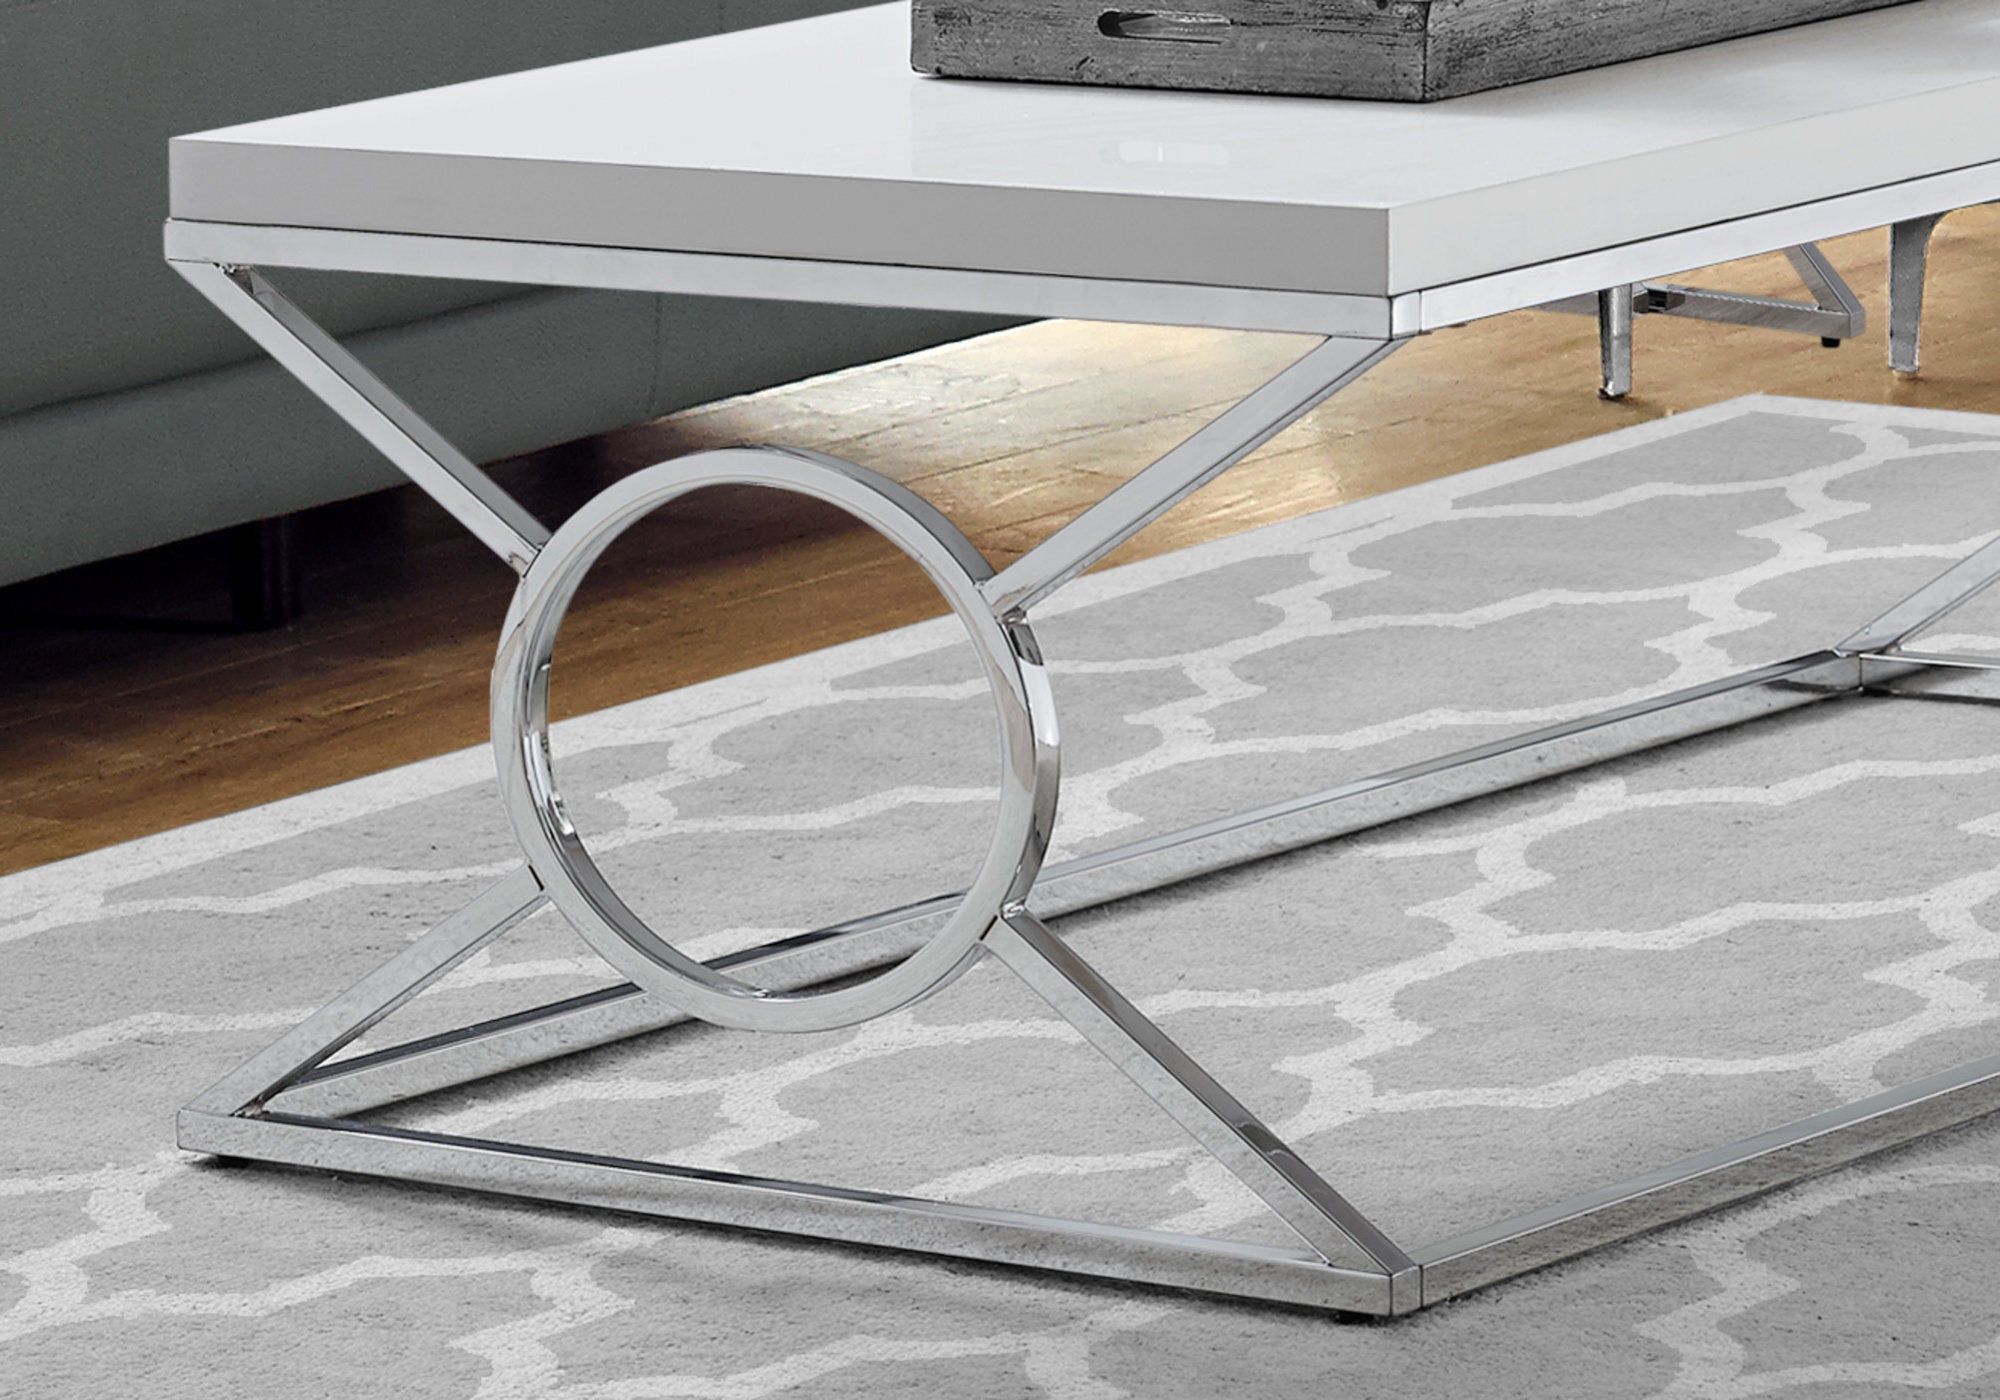 MN-433400    Coffee Table, Accent, Cocktail, Rectangular, Living Room, Metal Frame, Laminate, Glossy White, Chrome, Contemporary, Modern